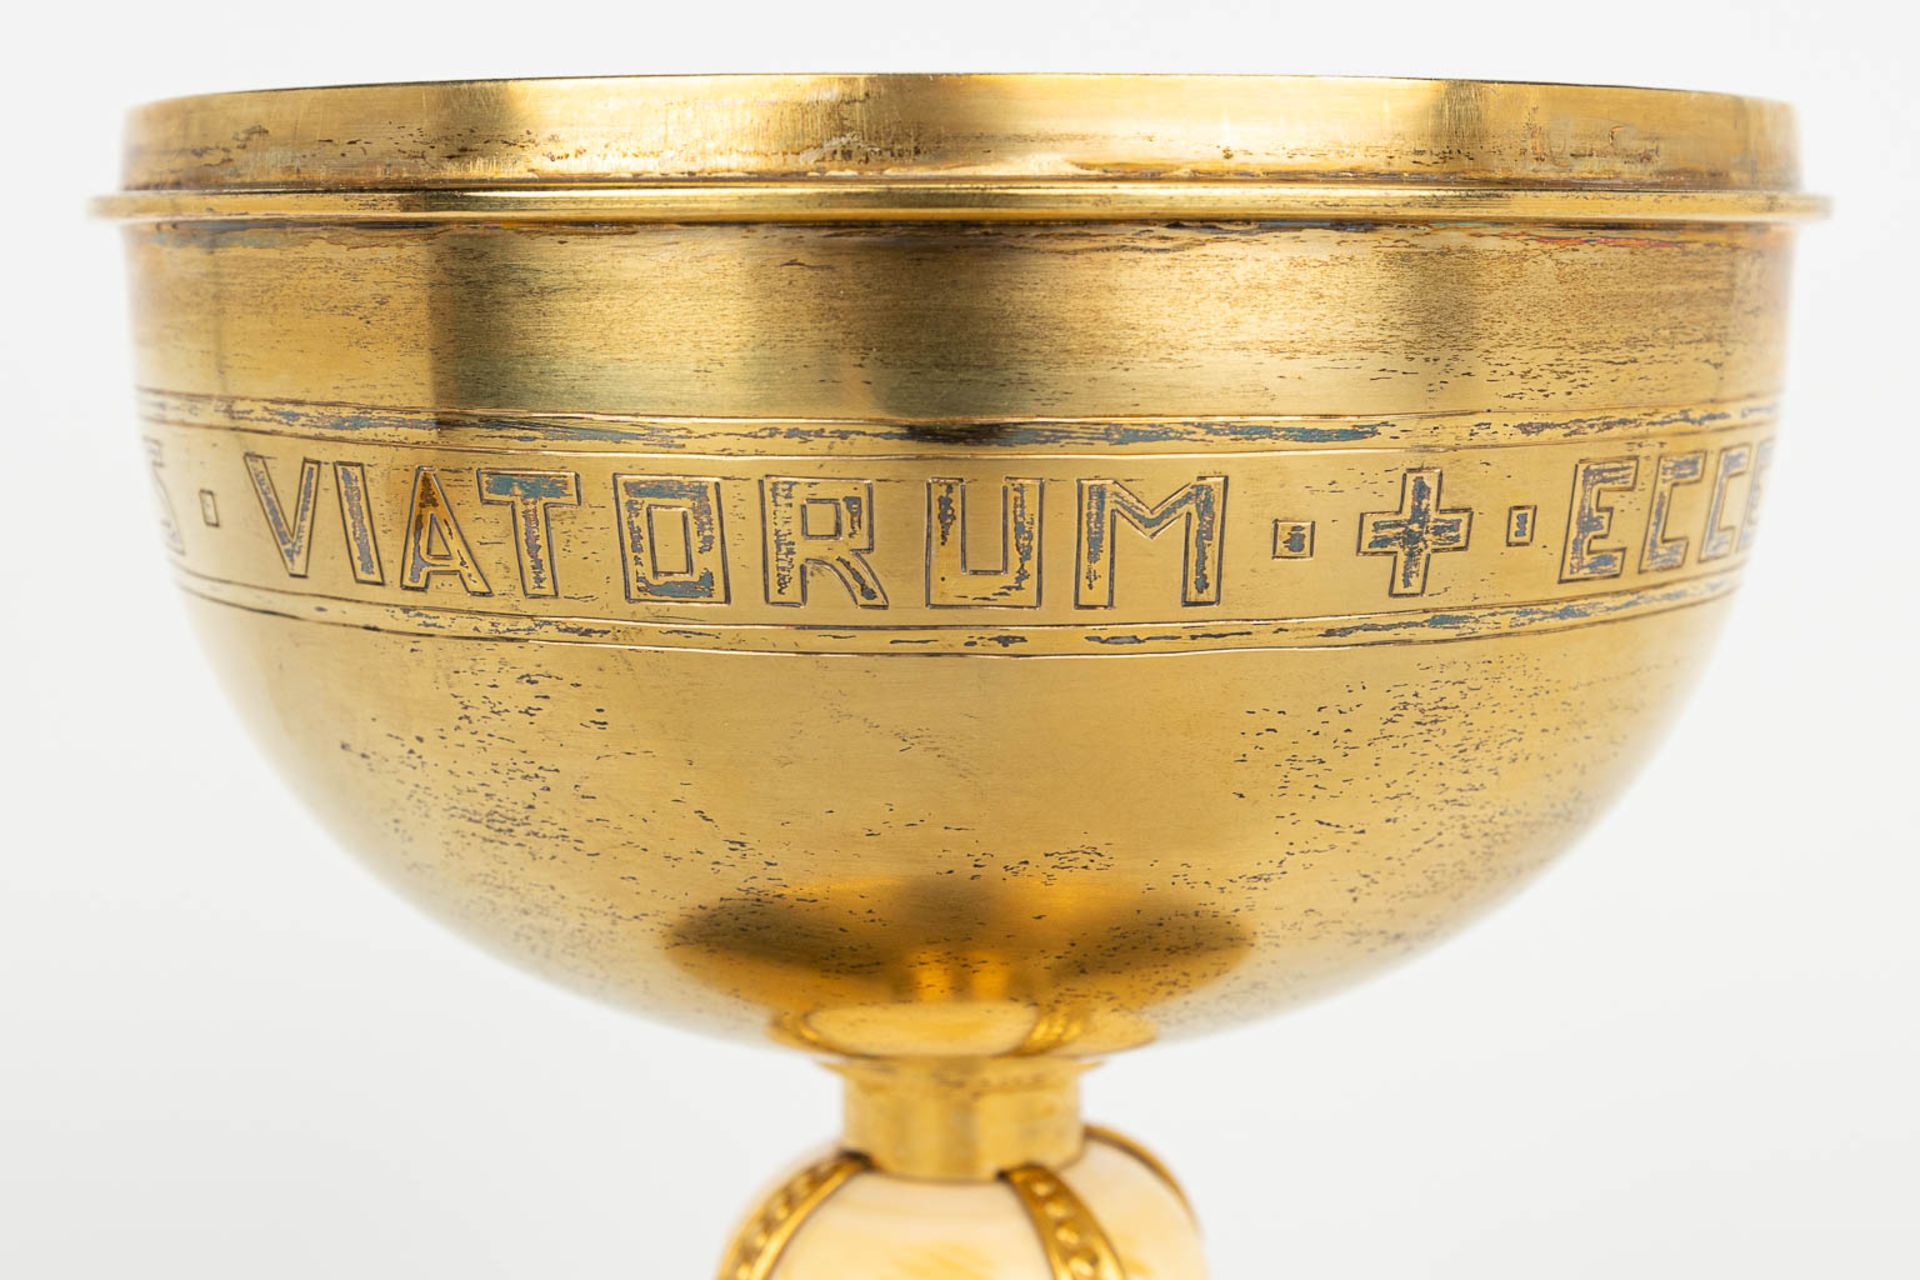 An art deco ciboria 'Viatorum Ecce Panis' and made of gold-plated silver. (H:25cm) - Image 6 of 12